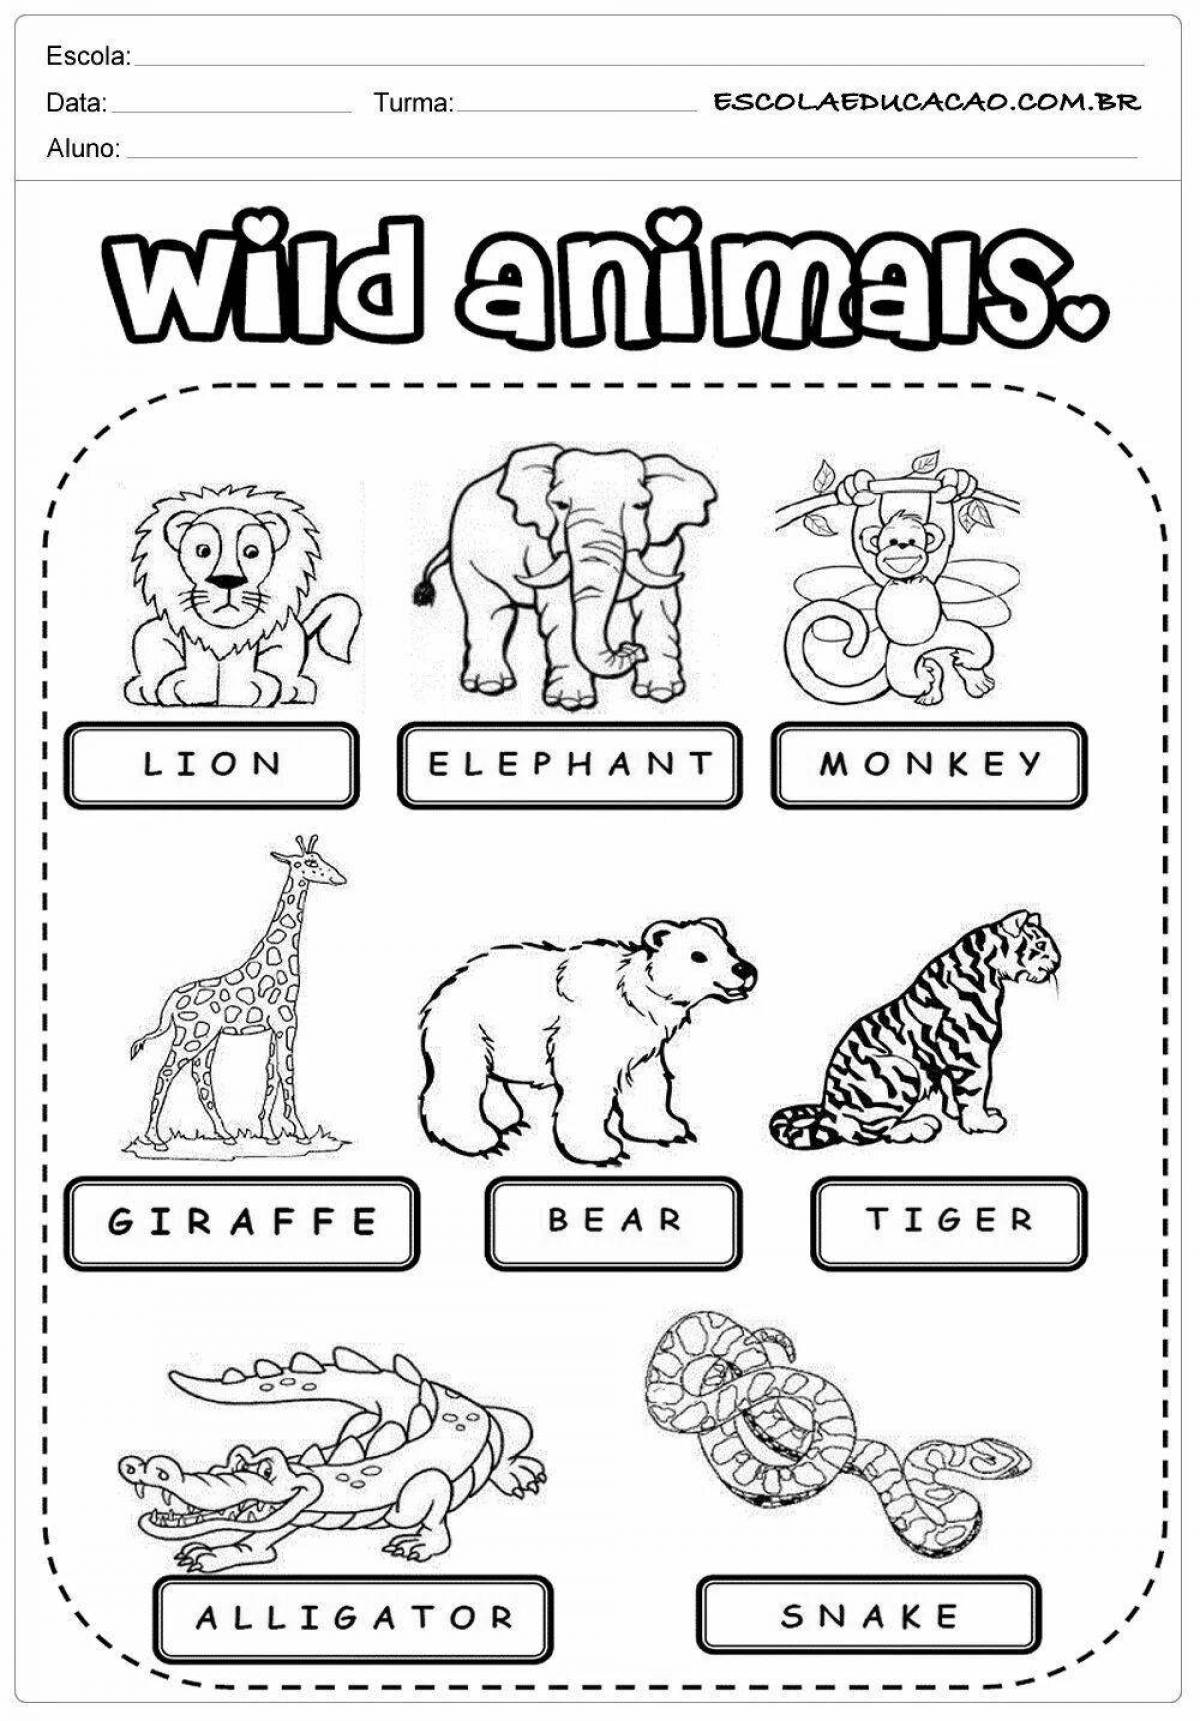 Fantastic coloring pages in english for kids